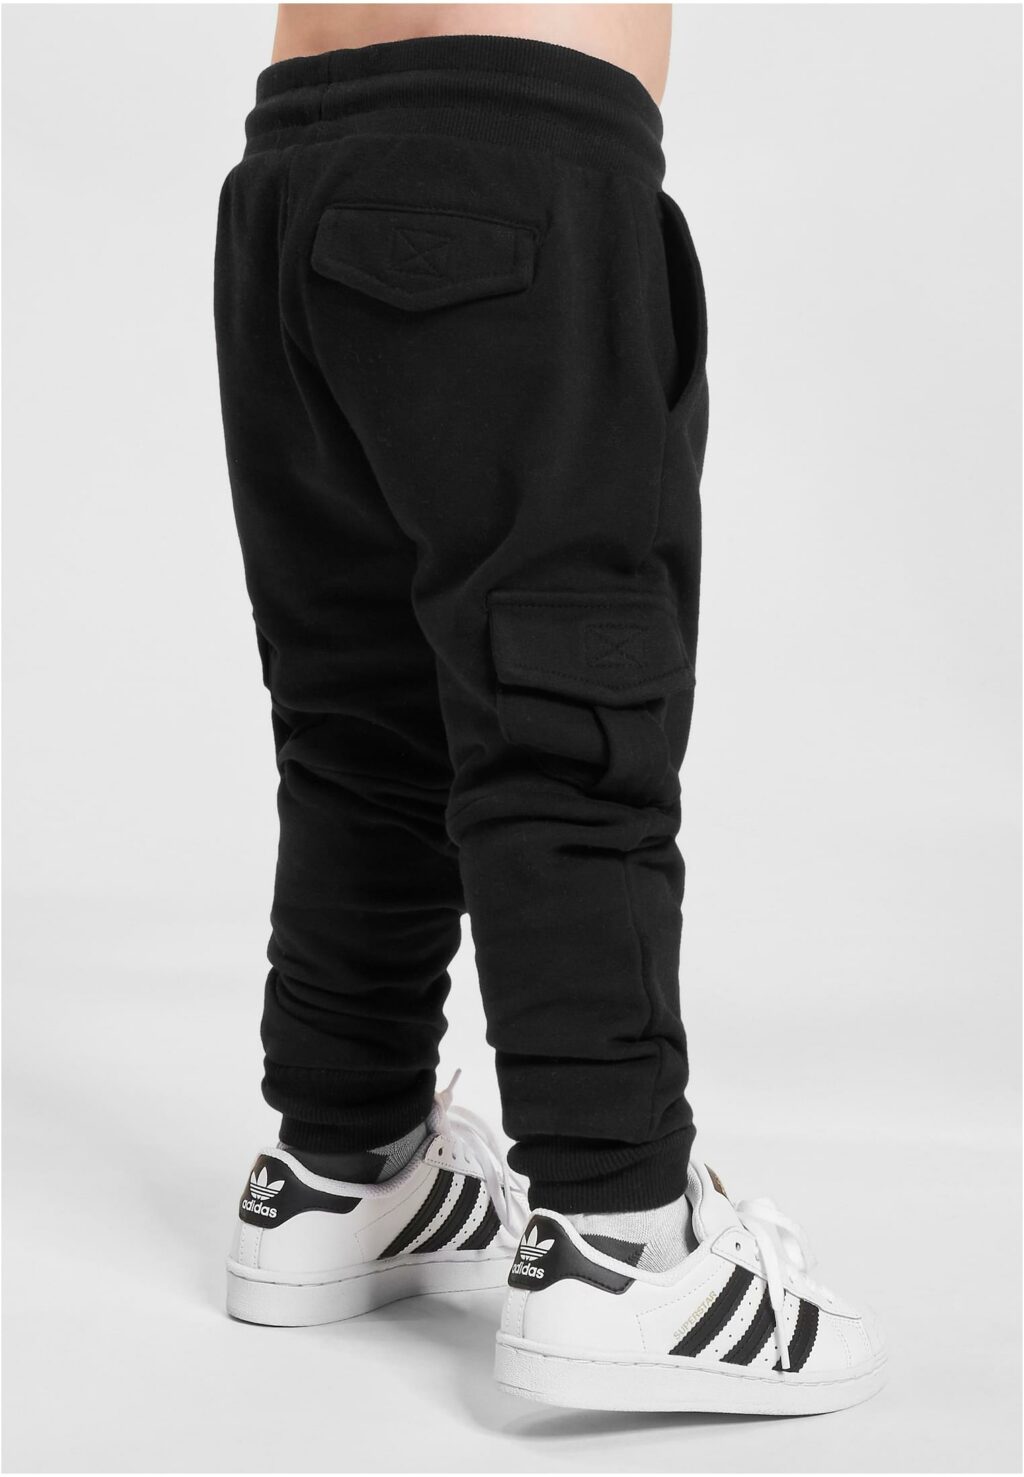 Boys Fitted Cargo Sweatpants black UCK1395